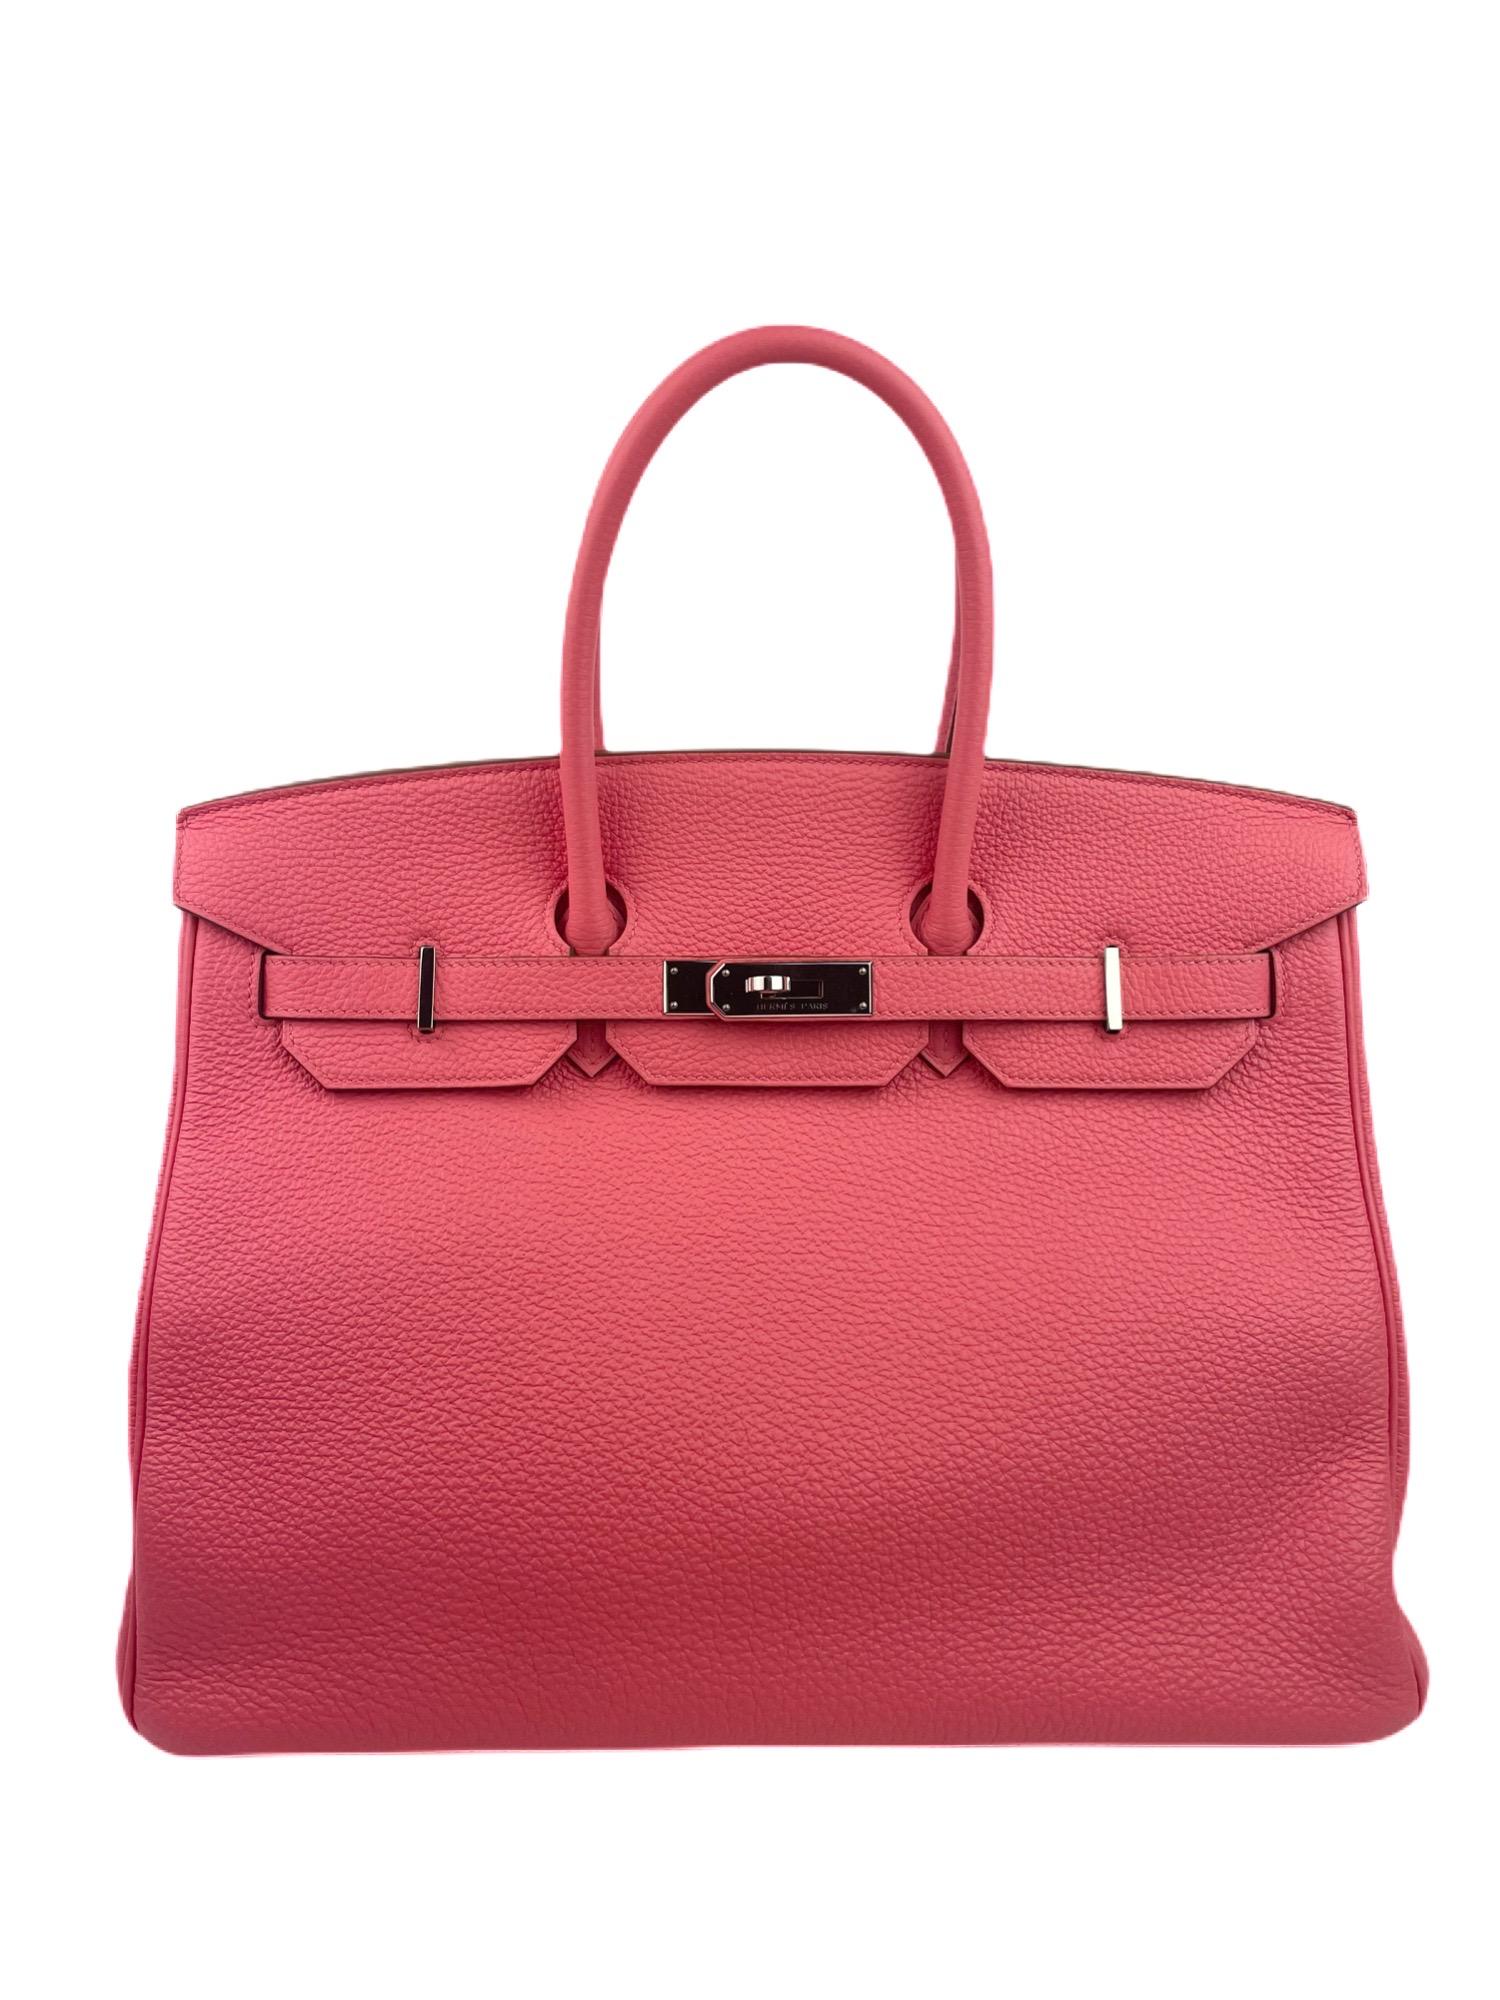 RARE Hermès Birkin 35 ROSE LIPSTICK Togo Leather Palladium Hardware. Pristine condition, light hairlines on hardware perfect corners and excellent structure. 

Shop with Confidence from Lux Addicts. Authenticity Guaranteed! 